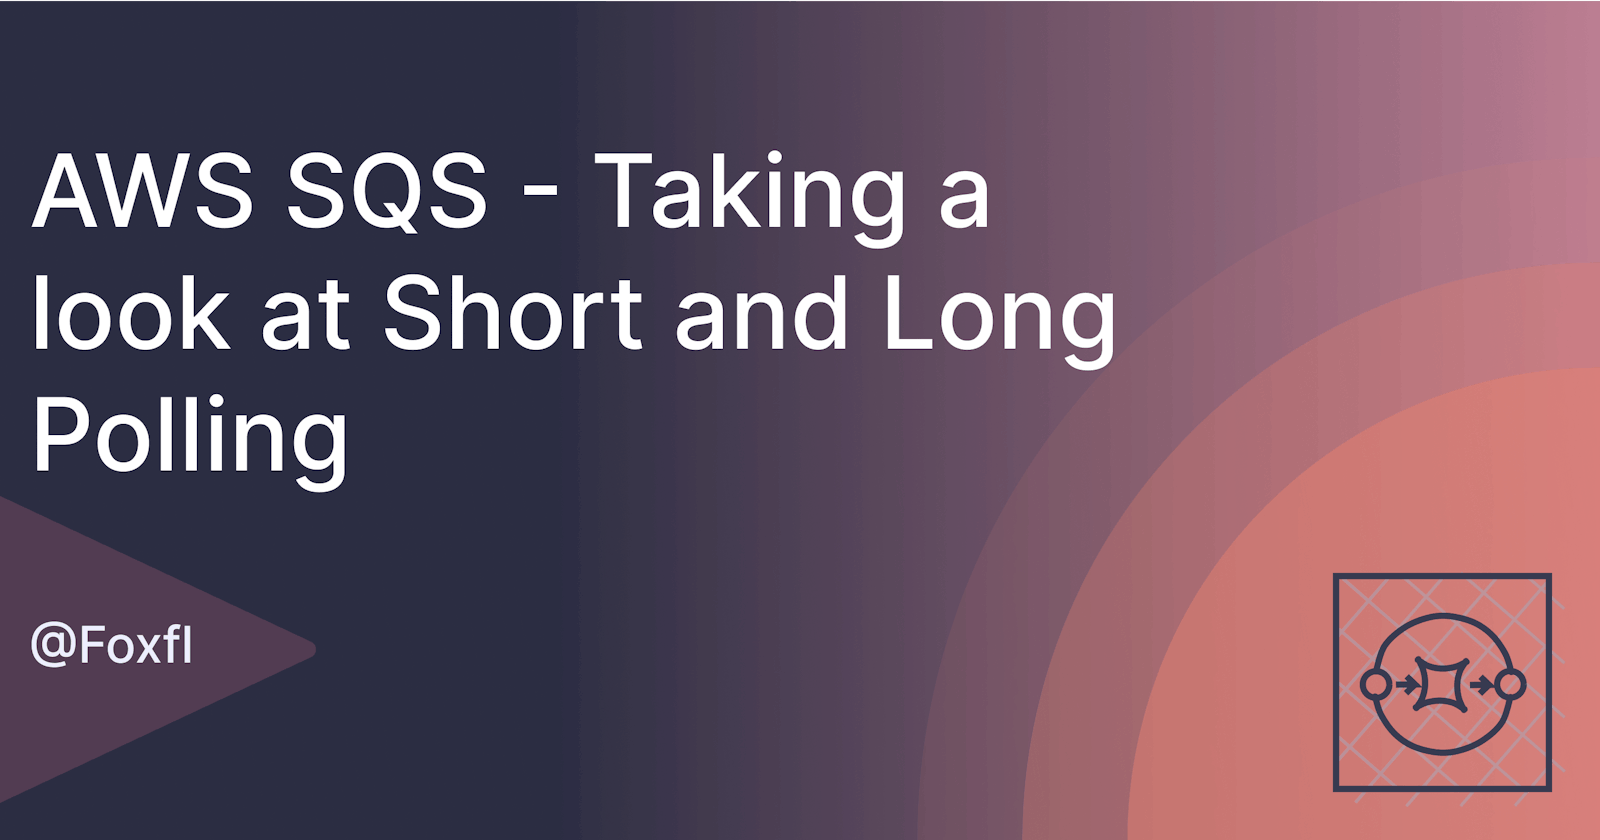 Taking a look at AWS SQS Short and Long Polling